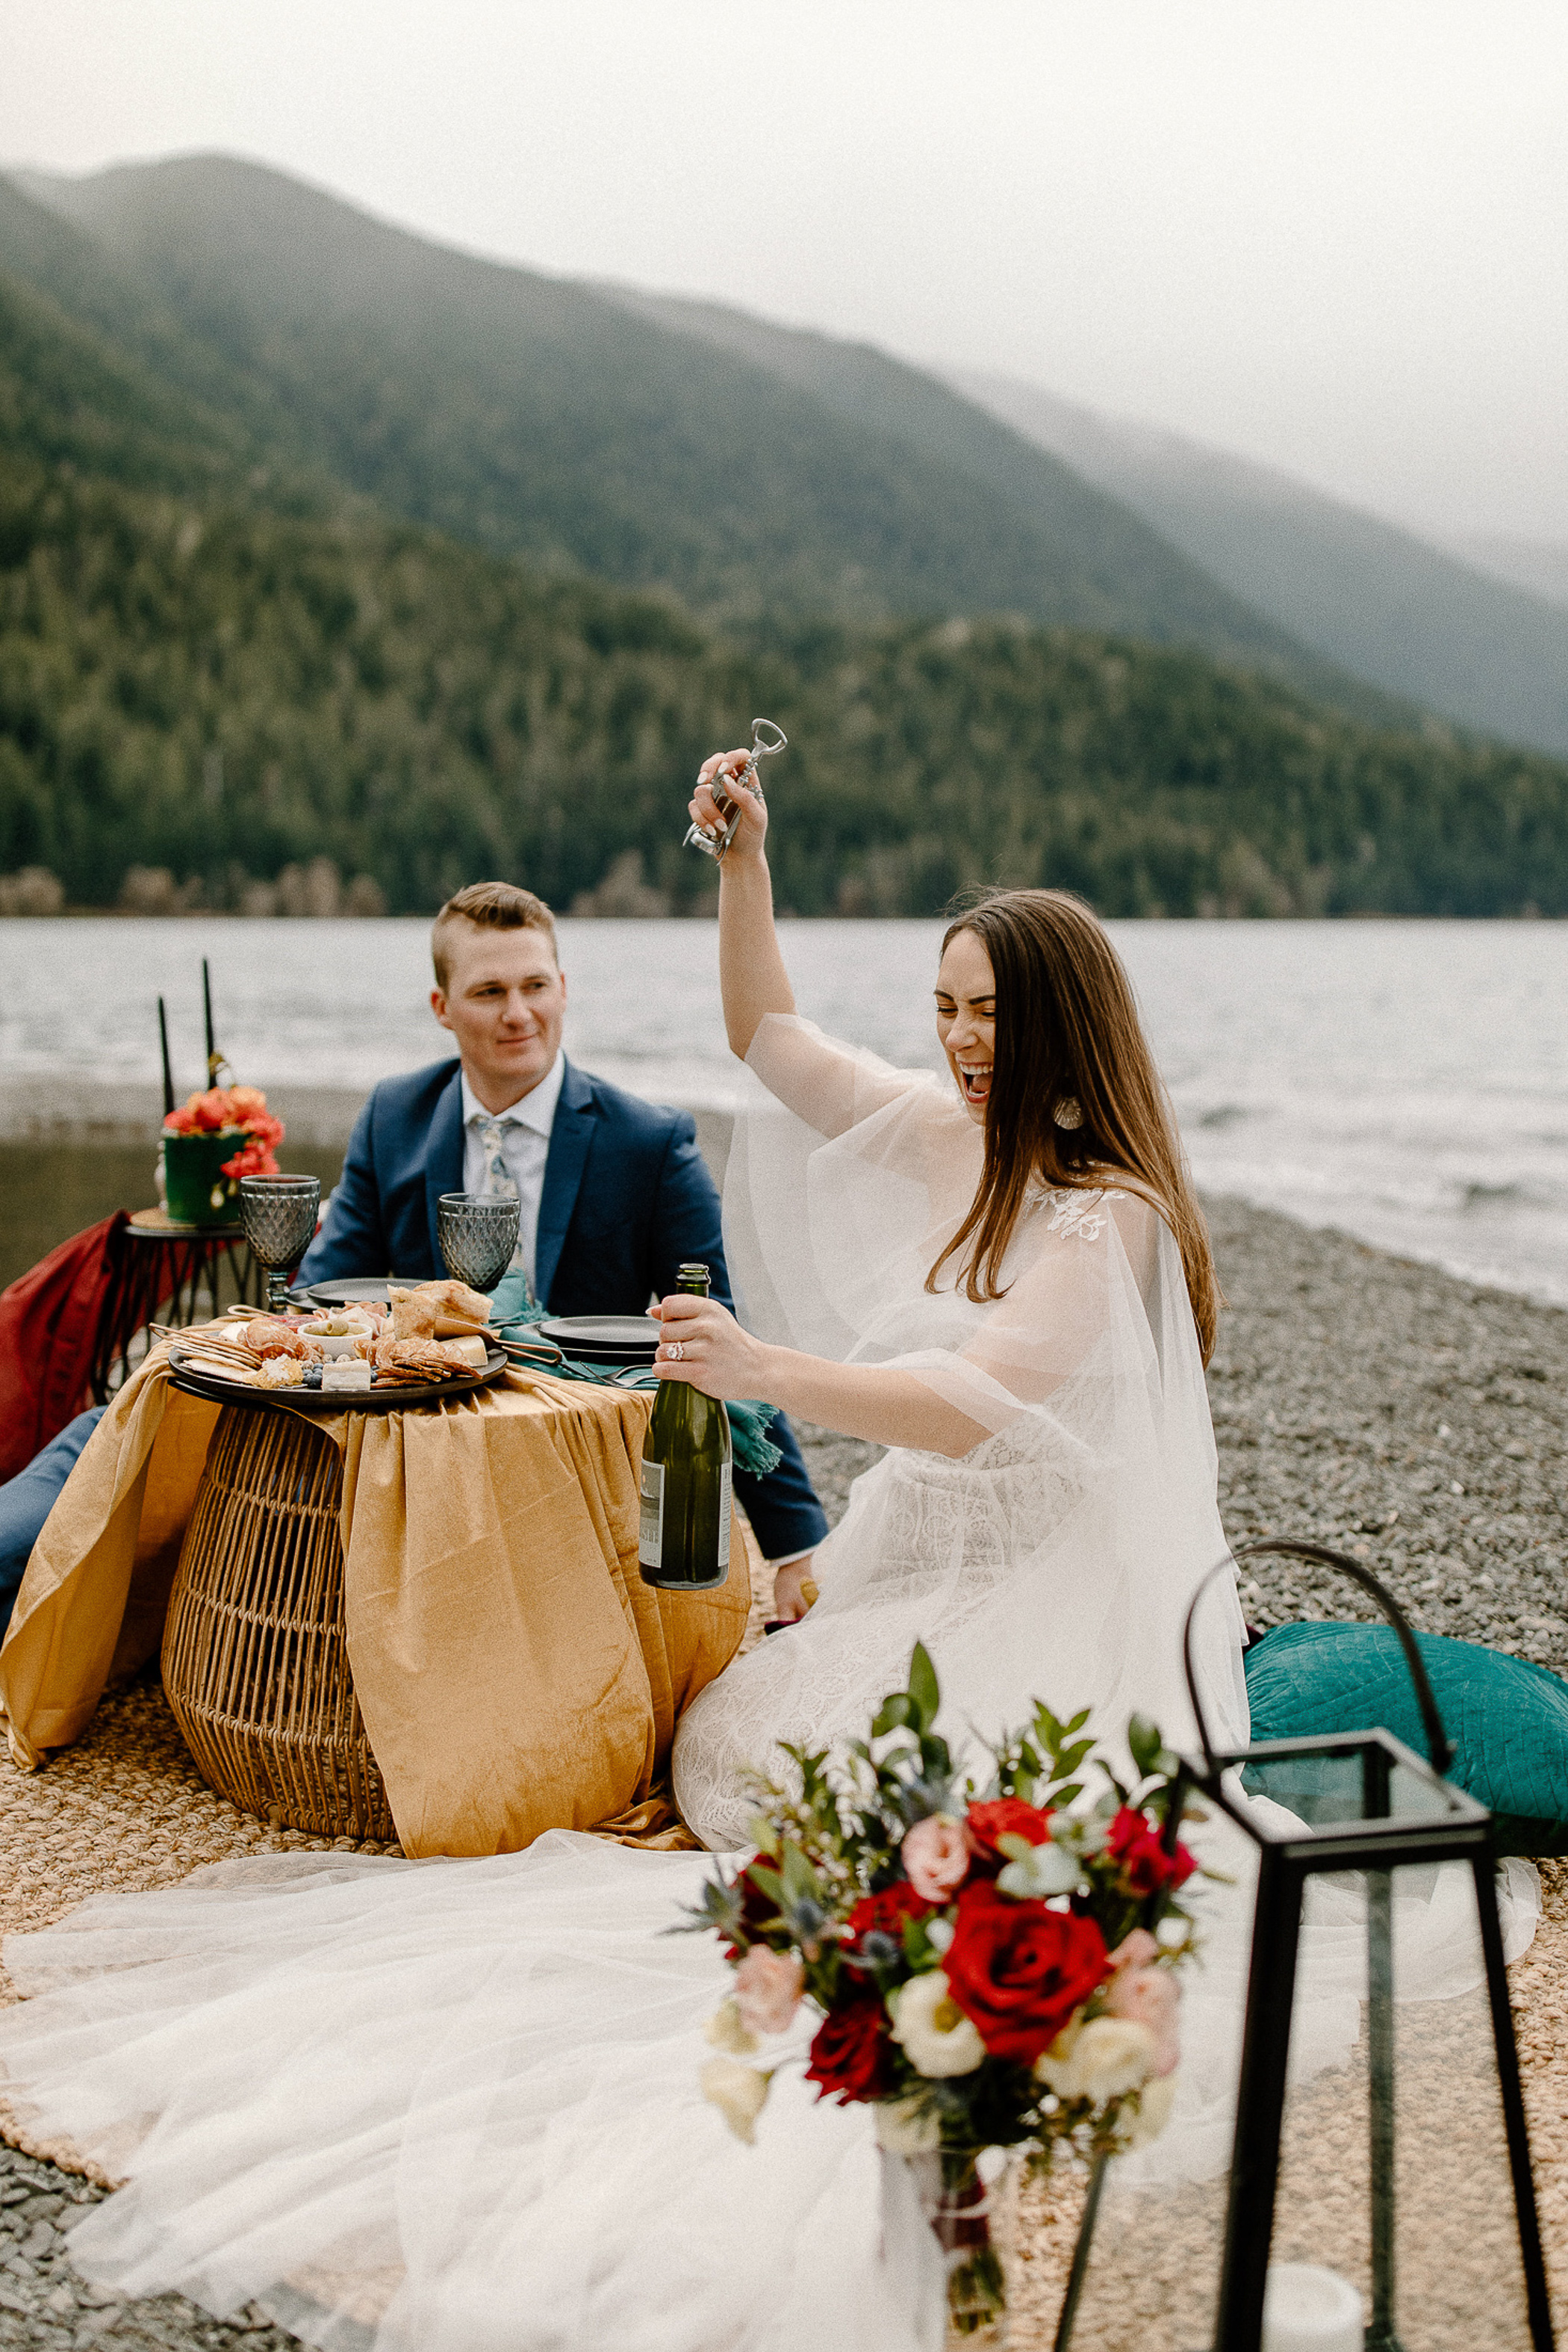 Lakeside private elopement for bride and groom